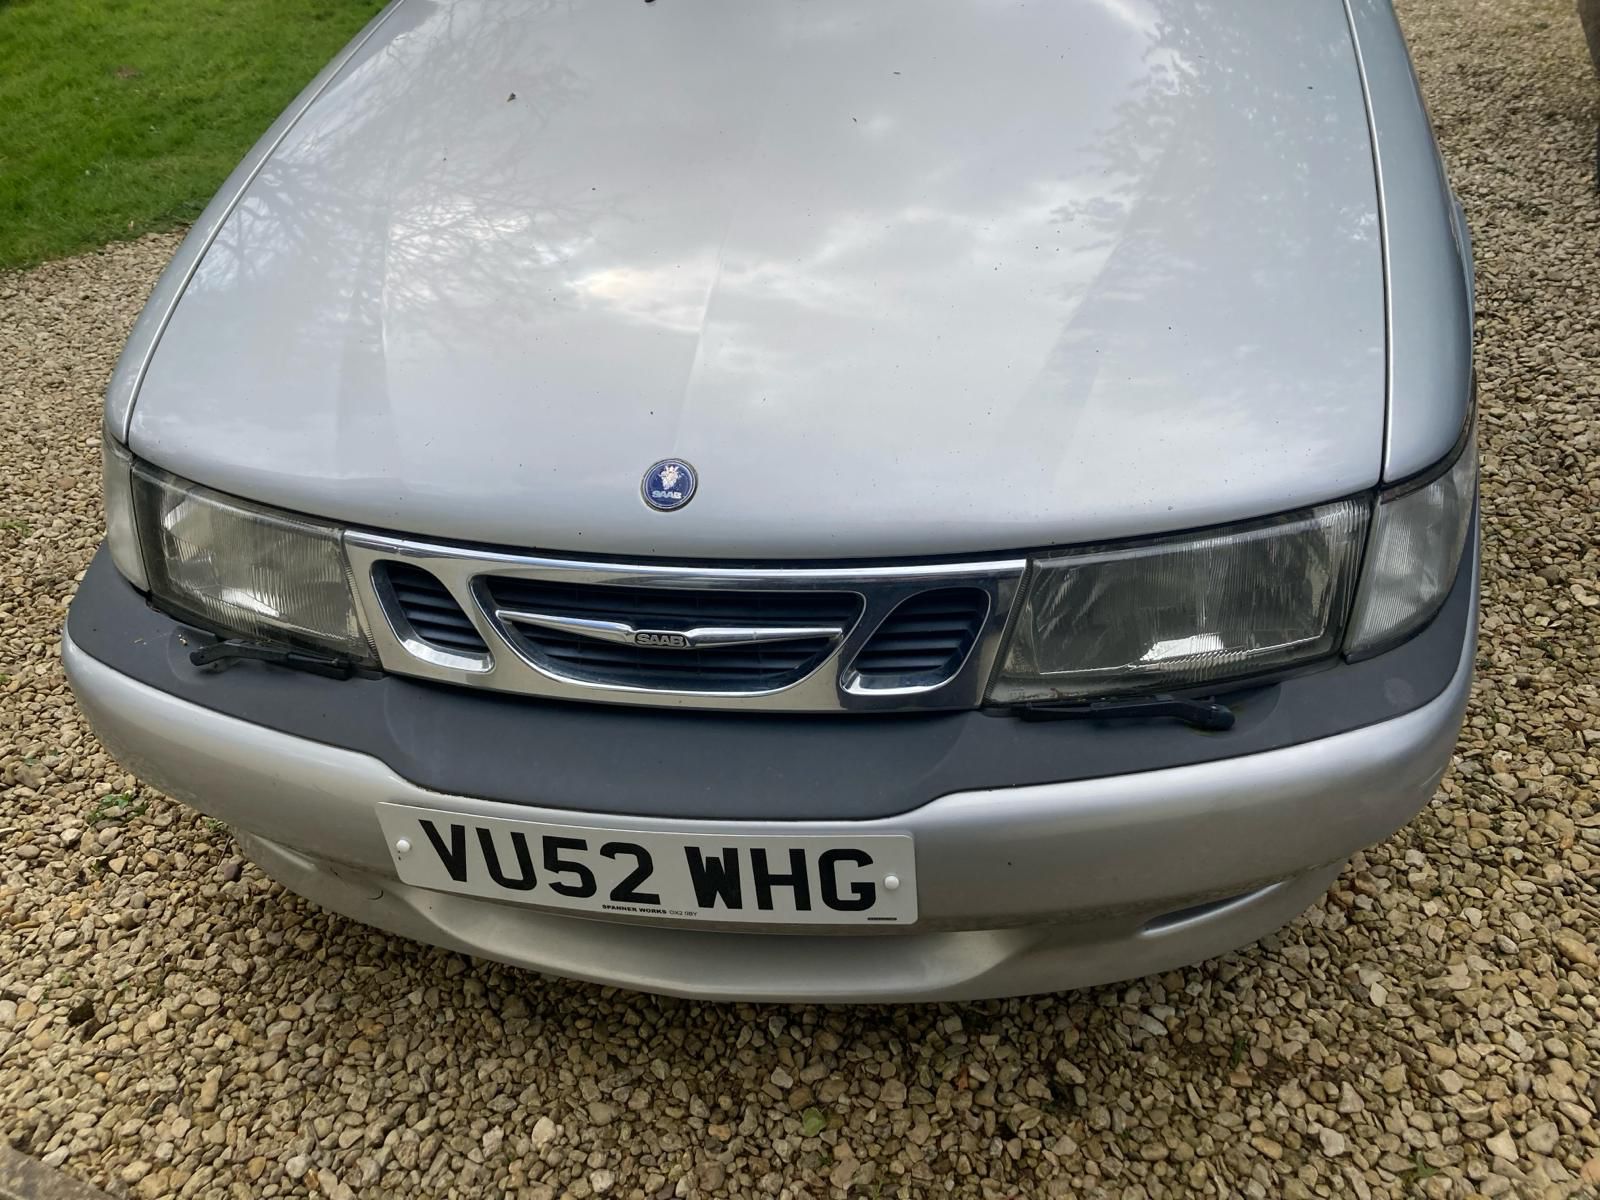 2002 Saab 9-3 Aero Convertible with 11 months MOT - Offered at No Reserve - Image 5 of 24